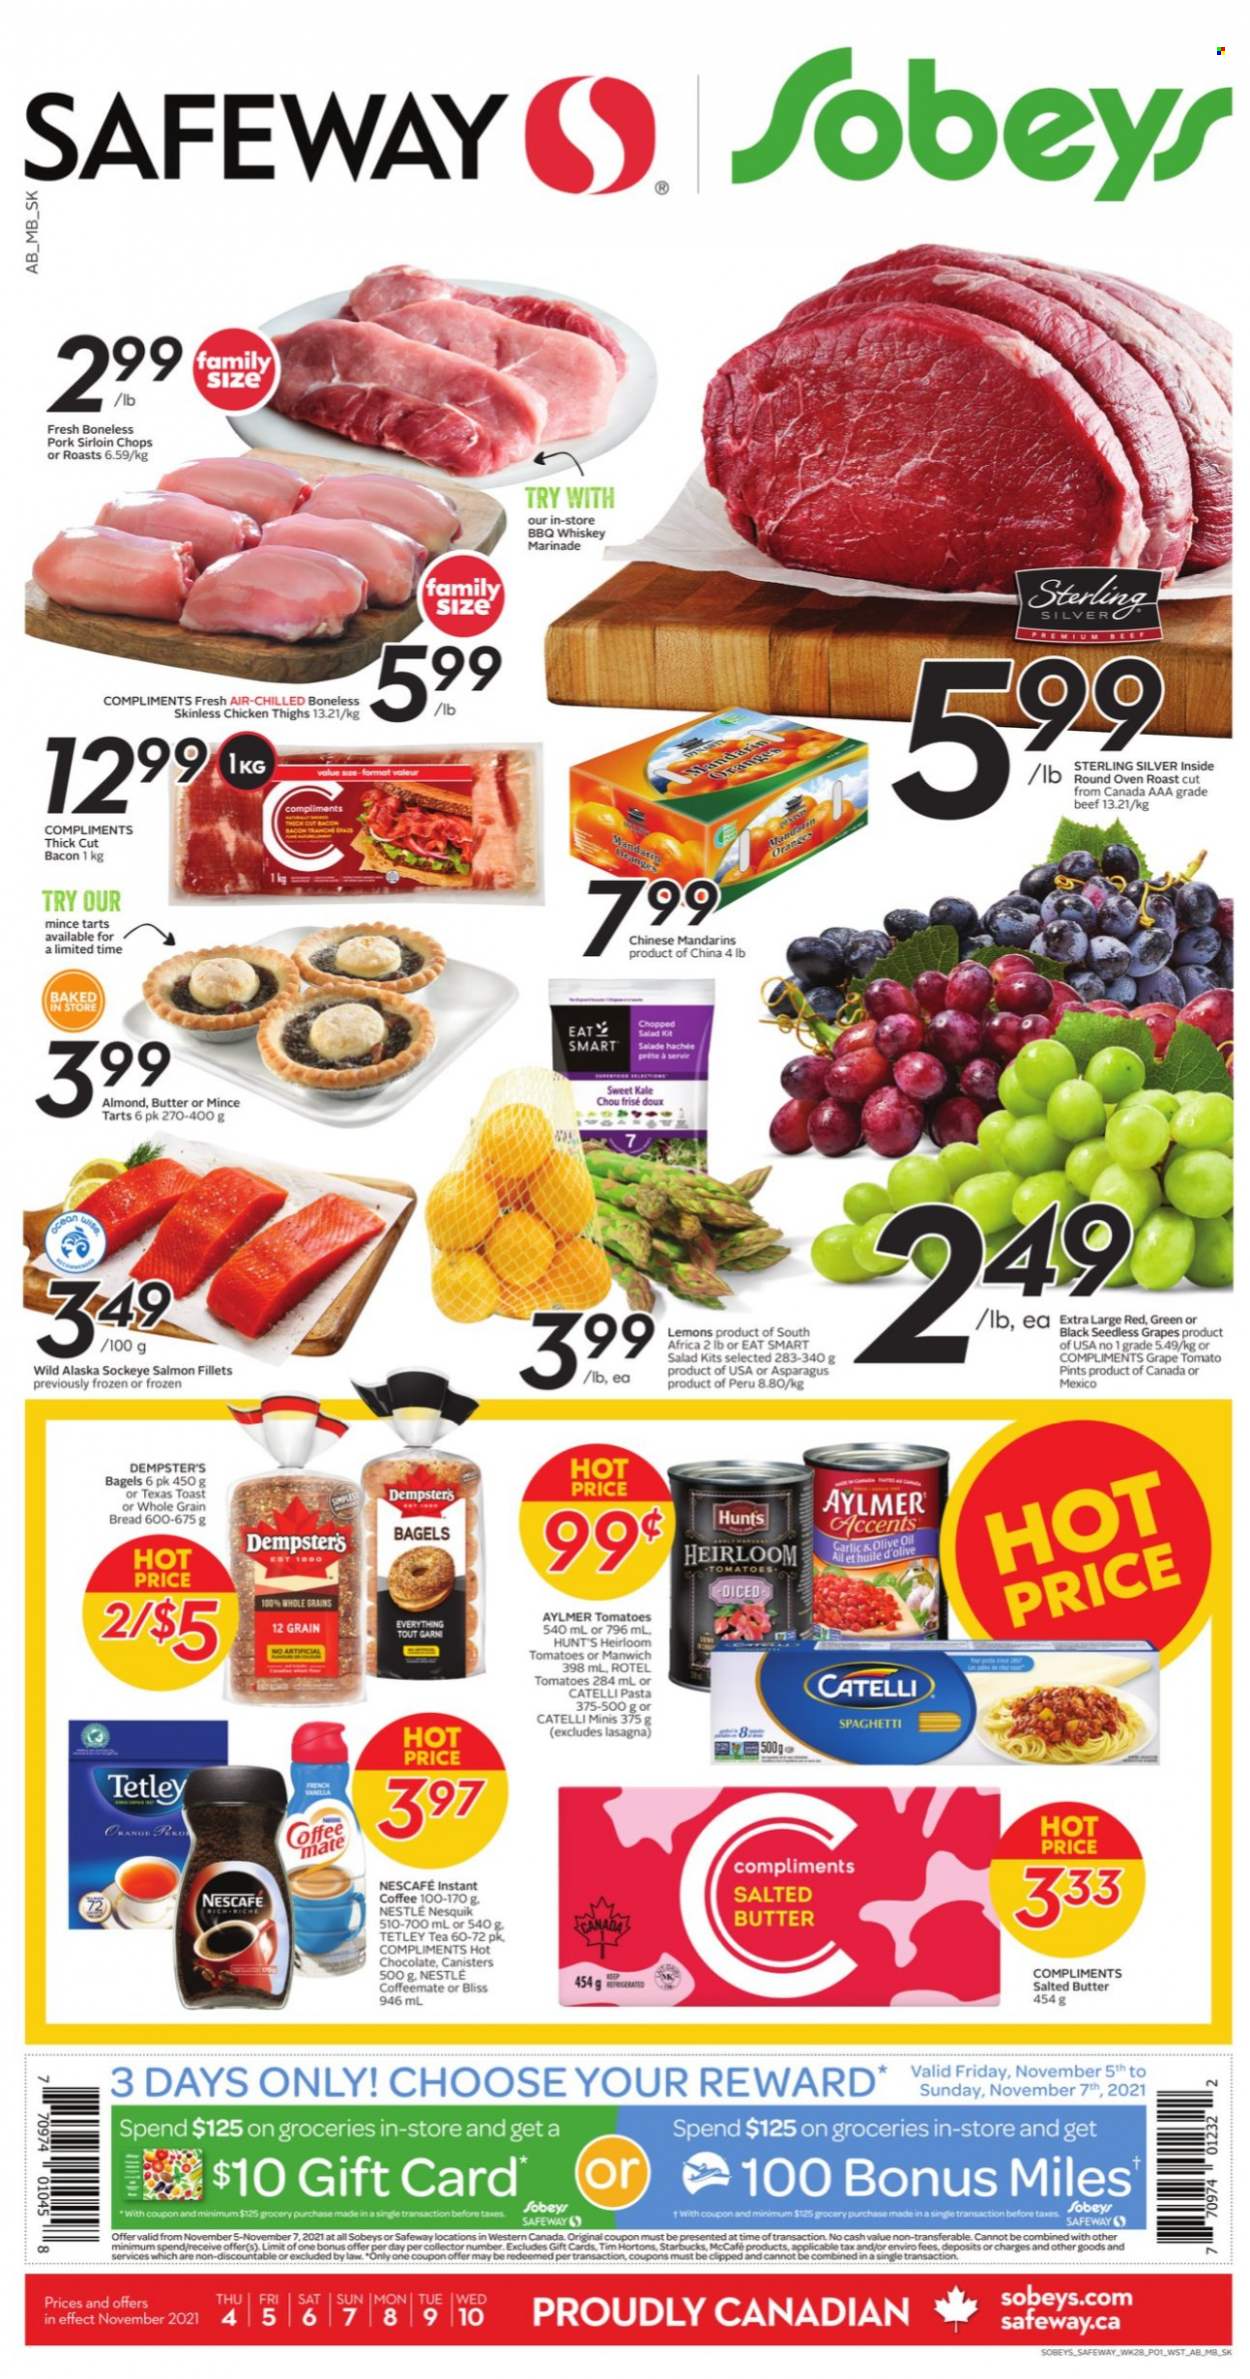 thumbnail - Safeway Flyer - November 04, 2021 - November 10, 2021 - Sales products - bagels, bread, asparagus, tomatoes, kale, salad, chopped salad, mandarines, seedless grapes, lemons, salmon, salmon fillet, spaghetti, pasta, bacon, butter, salted butter, Manwich, marinade, olive oil, oil, hot chocolate, tea, instant coffee, Starbucks, McCafe, whiskey, whisky, chicken thighs, chicken, pork loin, Nesquik, Nestlé, Nescafé. Page 1.